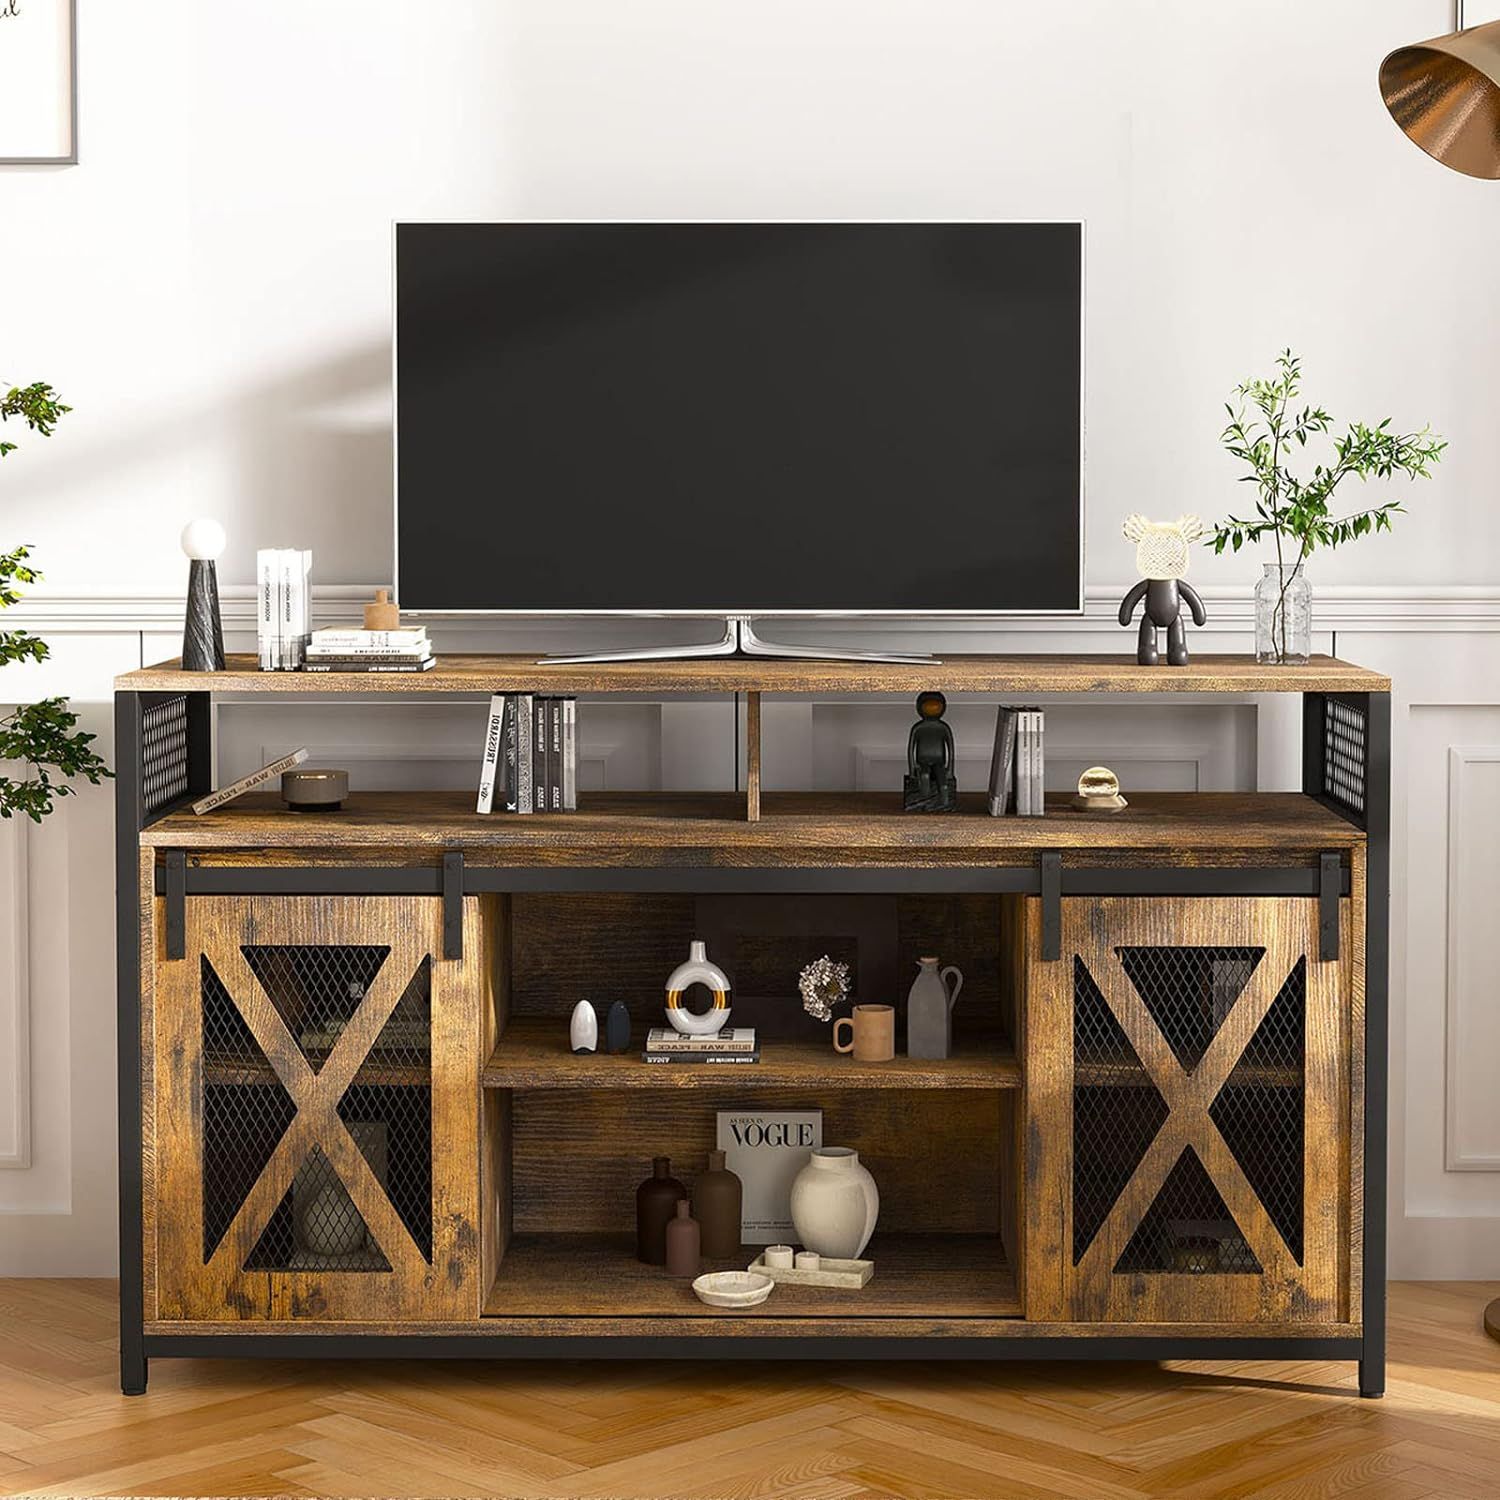 Nolany Tv Stand With Sliding Barn Doors, India | Ubuy With Regard To Barn Door Media Tv Stands (Photo 10 of 15)